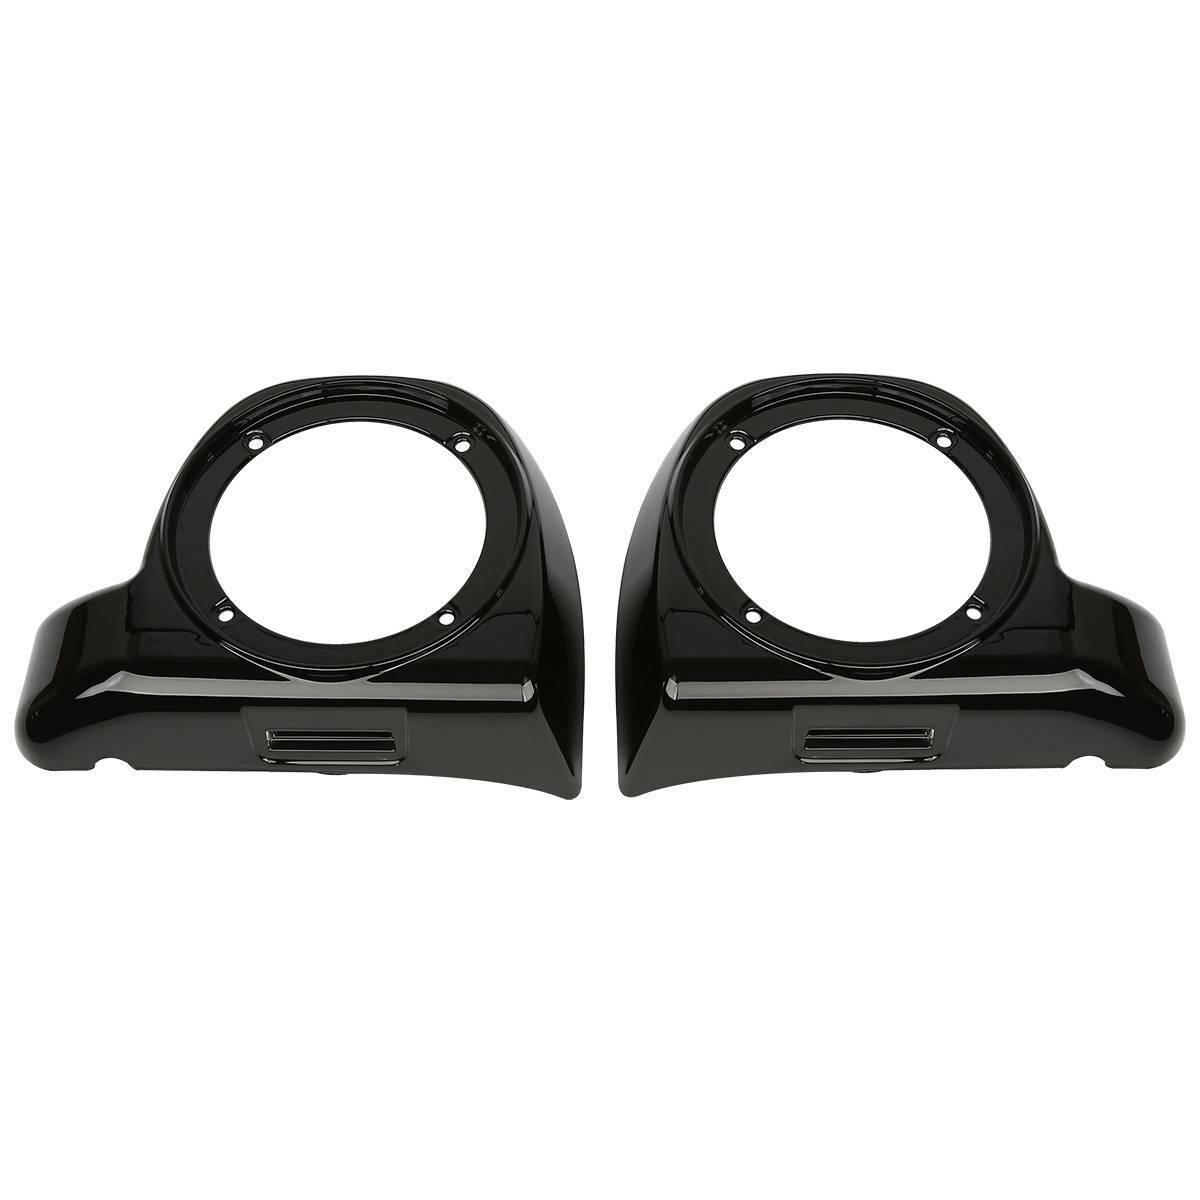 Lower Vented Fairing 6.5" Speakers Box w/ Enclosure For Harley Touring 14-22 15 - Moto Life Products